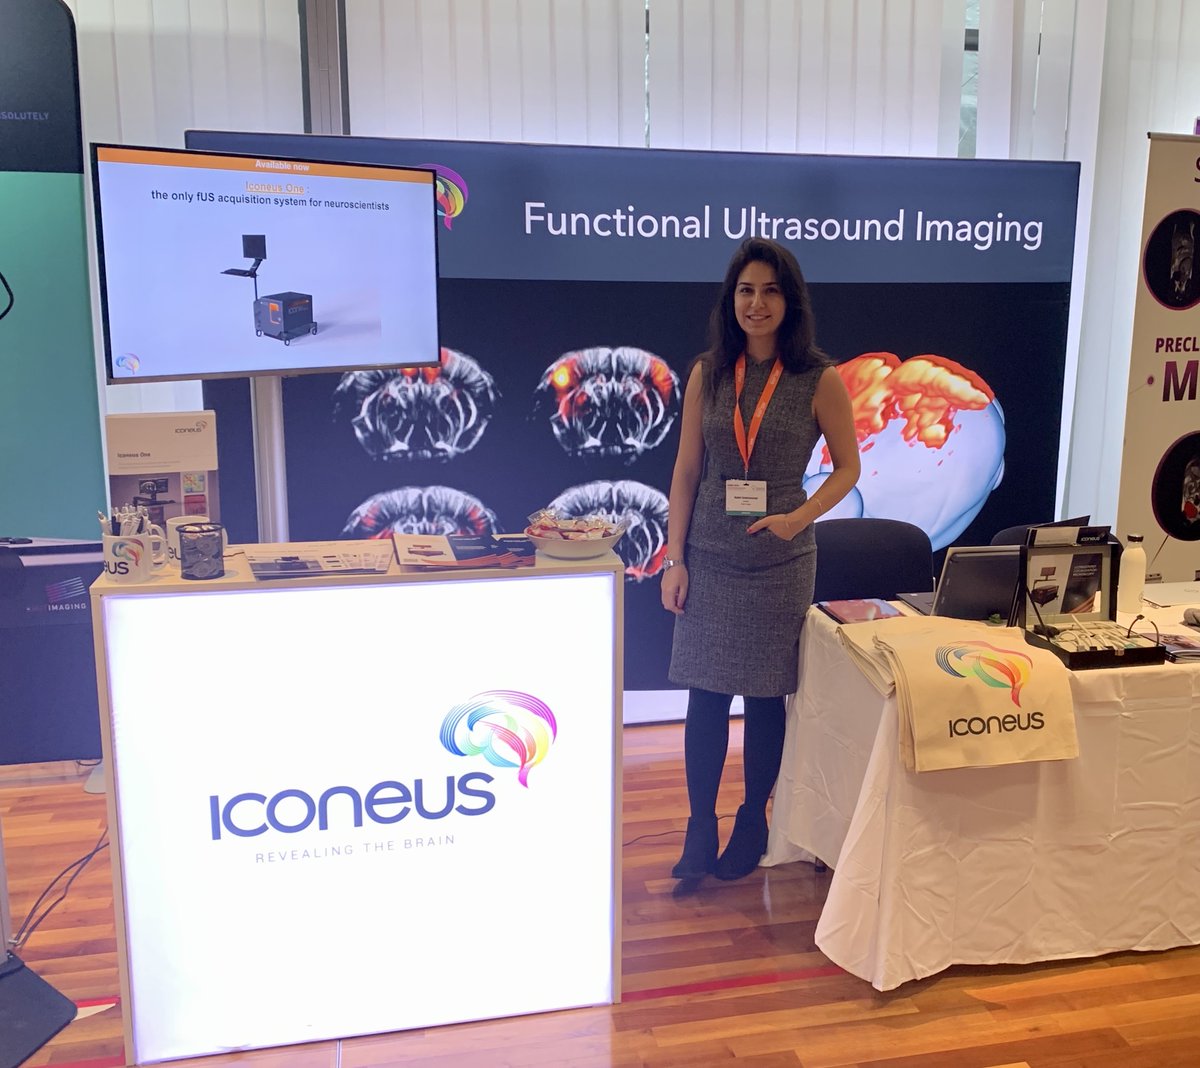 Are you attending #emim2023 in Salzburg ? Come meet us and learn more about our innovative #fUS imaging solutions. See you there! #molecularimaging #neurotwitter